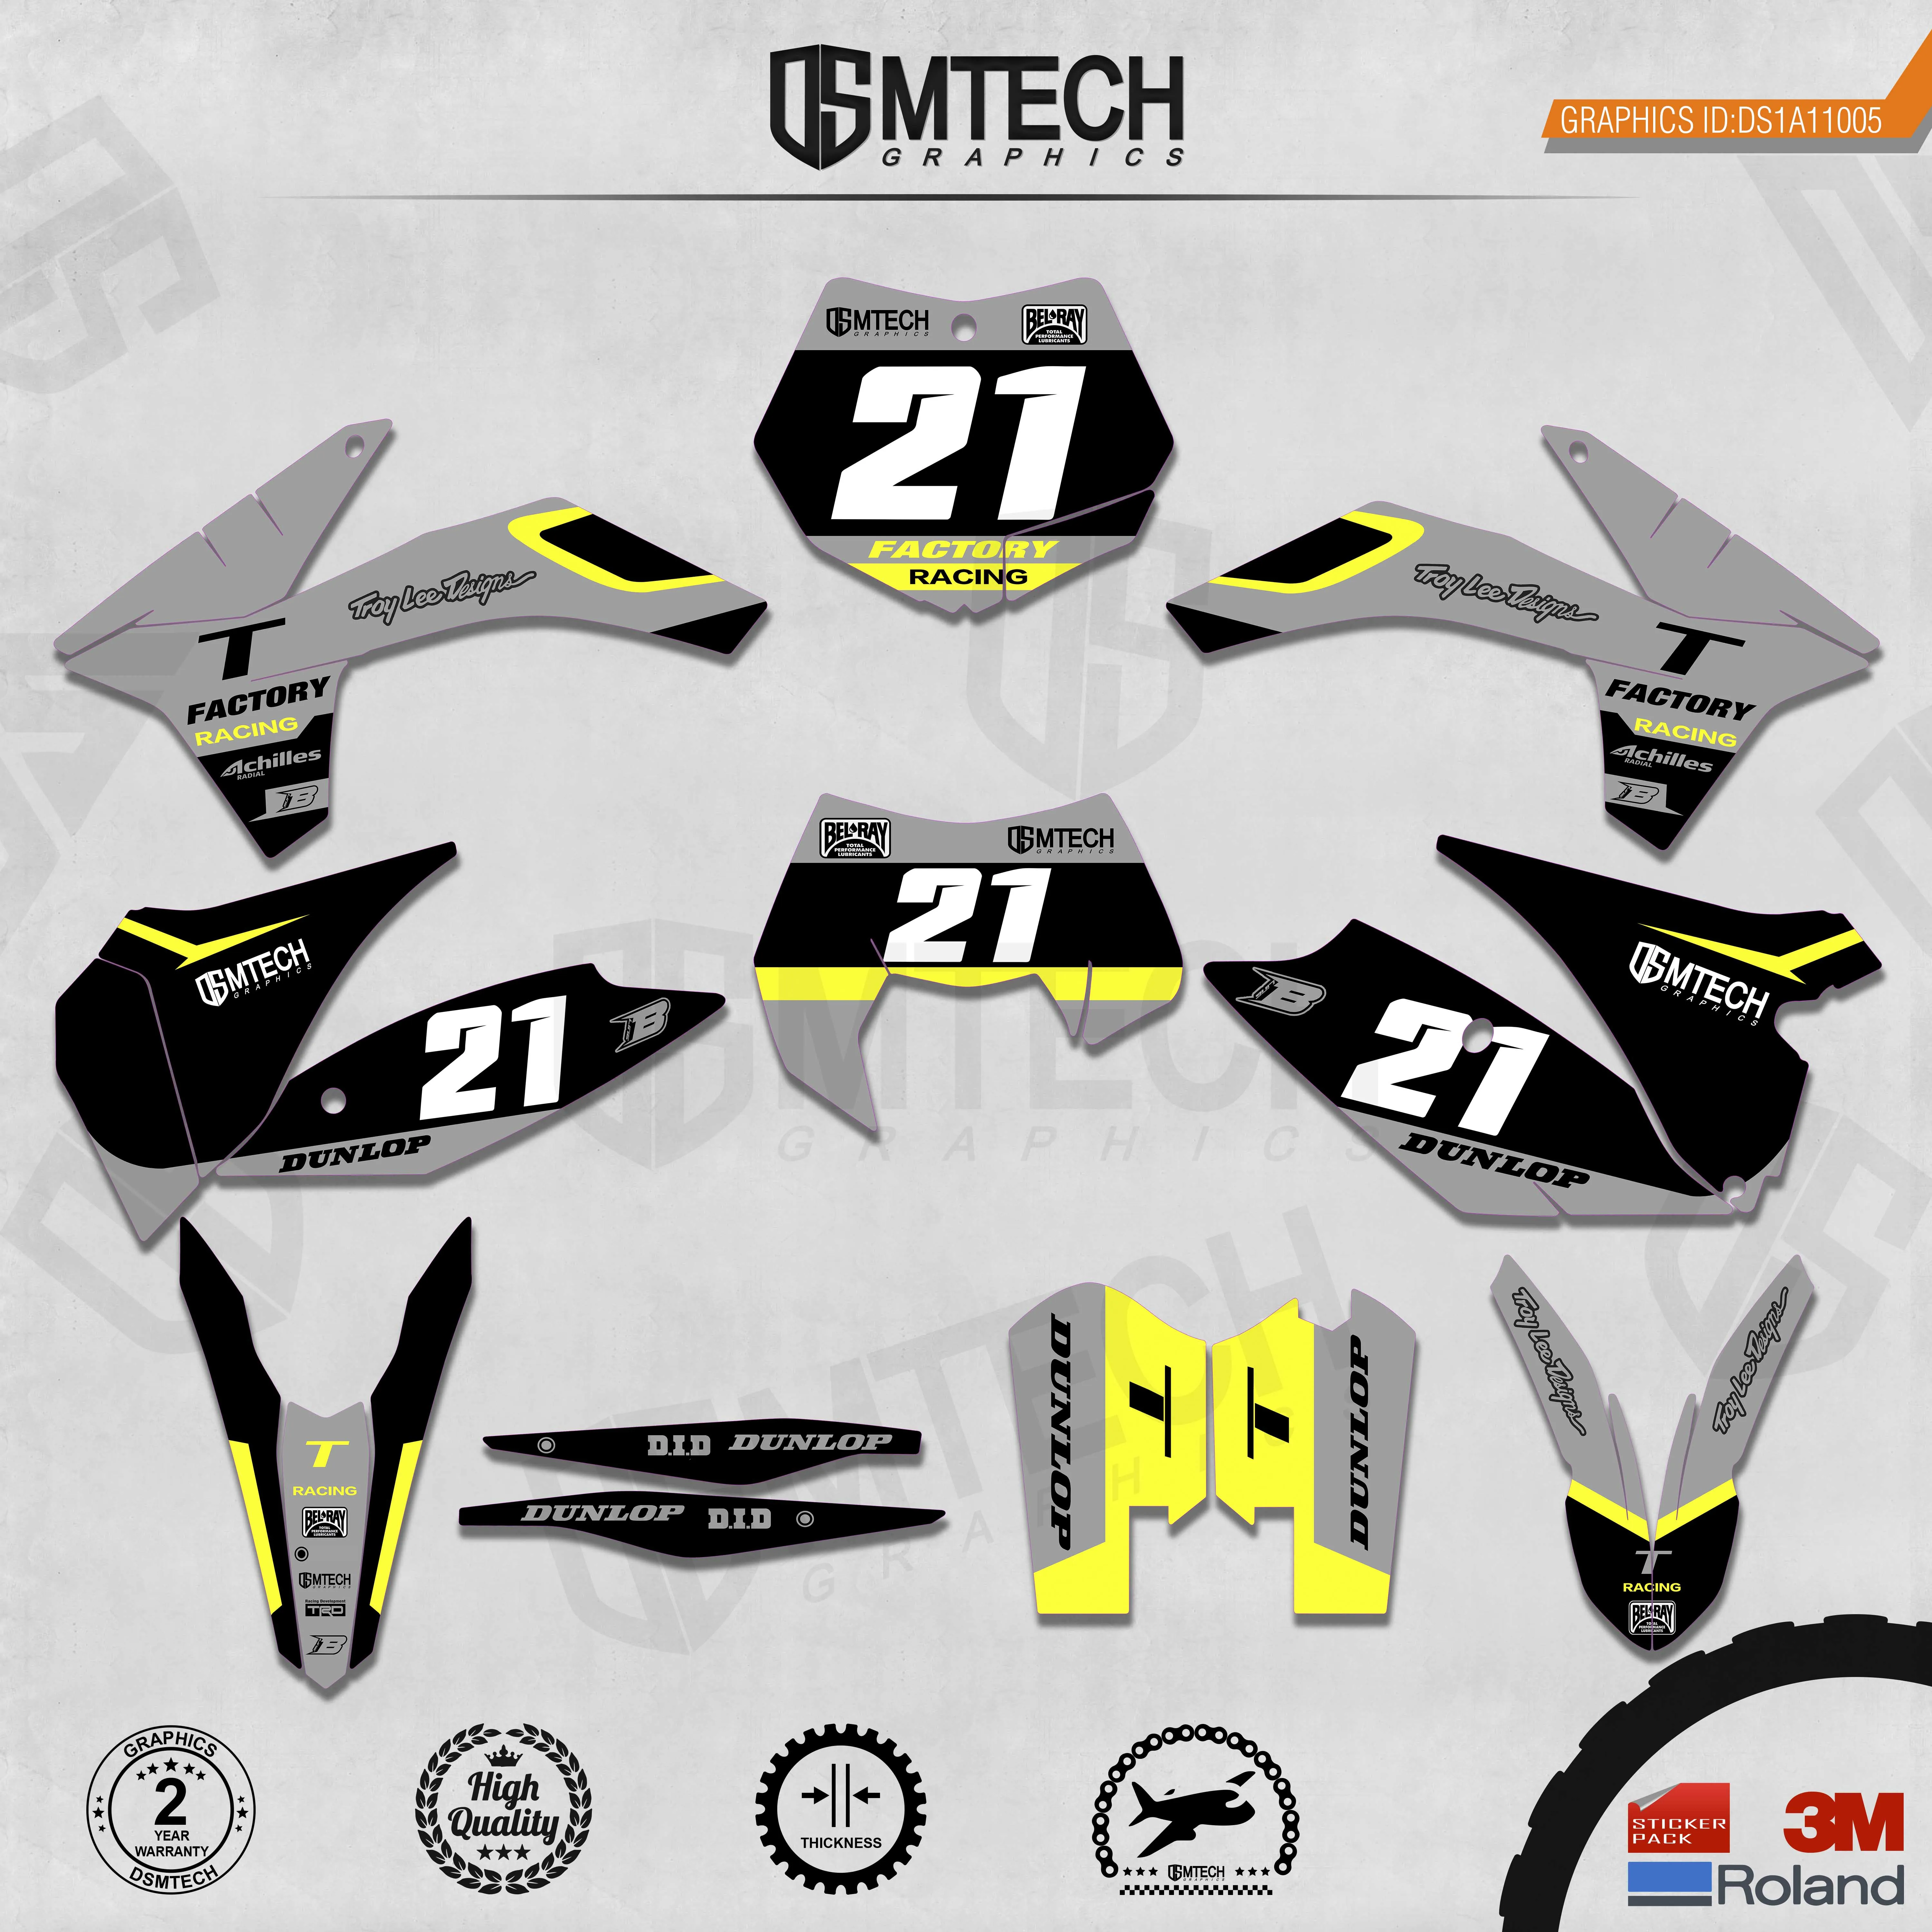 DSMTECH Customized Team Graphics Backgrounds Decals 3M Custom Stickers For  2011-2012 SXF  2012-2013EXC  005